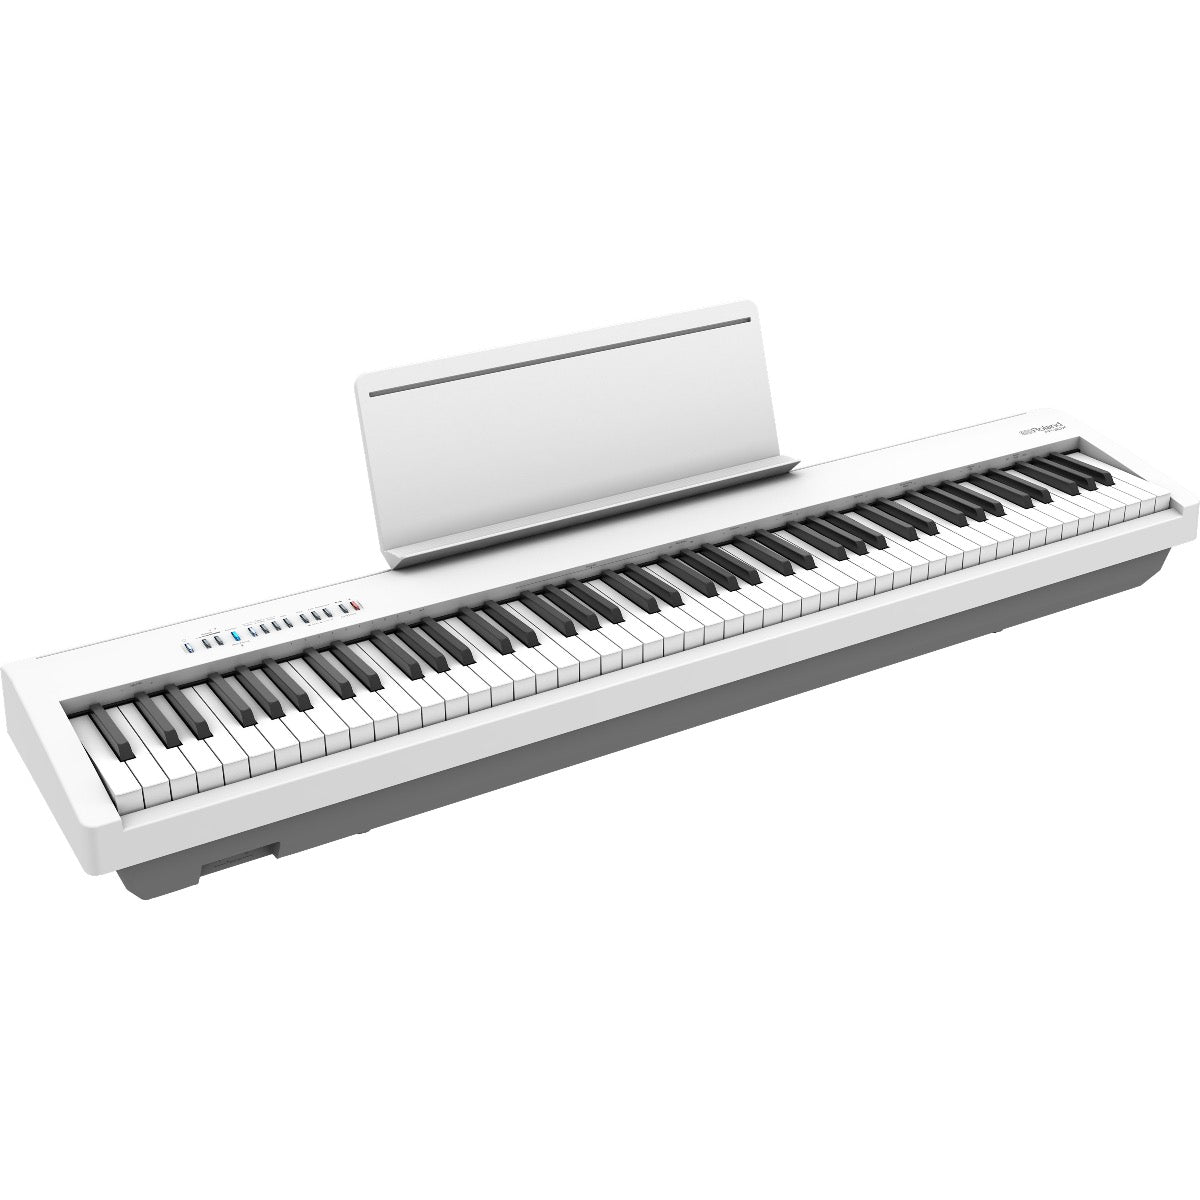 3/4 view of Roland FP-30X Digital Piano - White with music rest installed showing top, front and left side